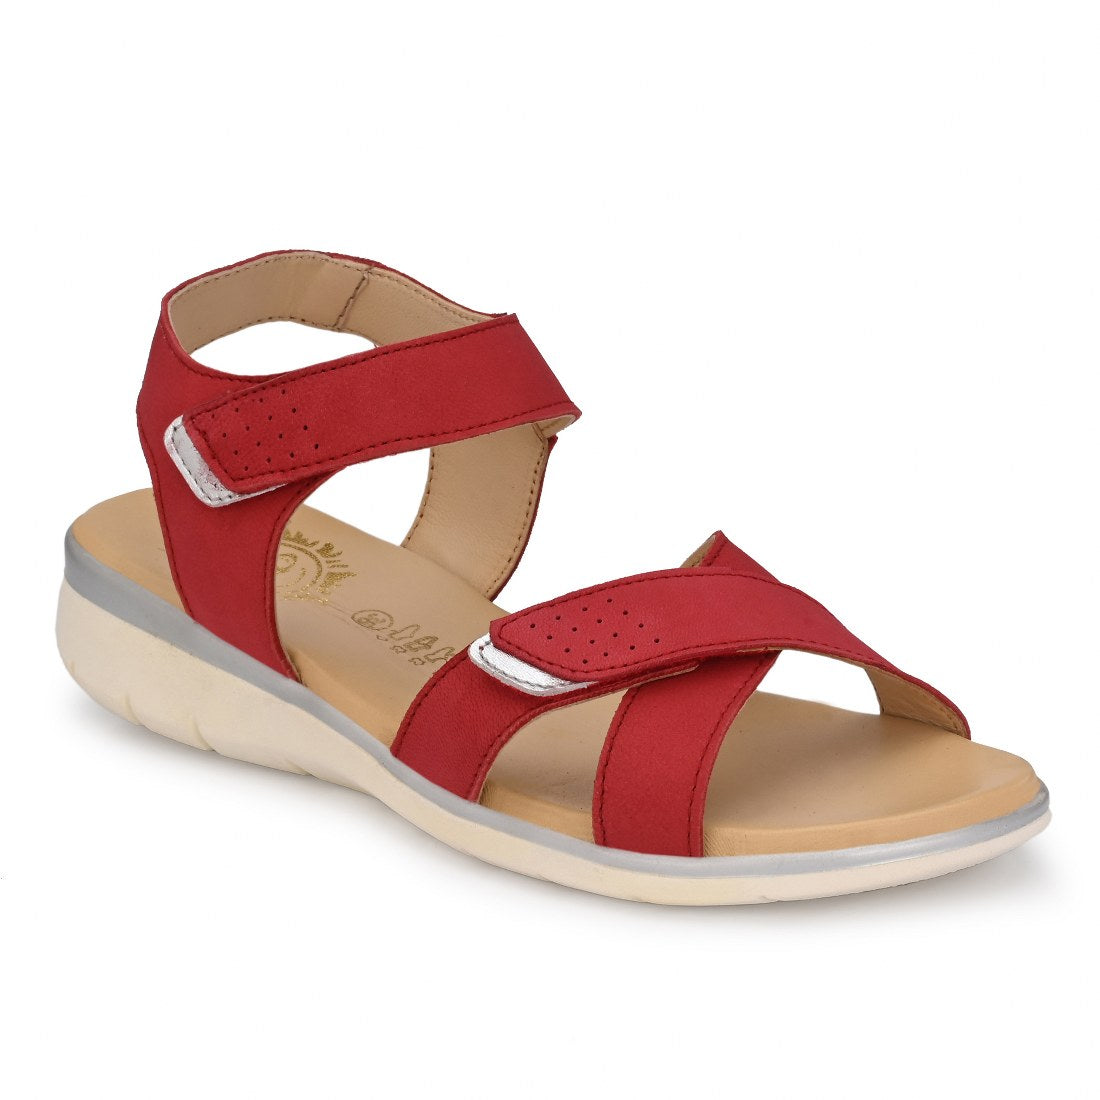 W-HR-TEMPE-65 WOMEN LEATHER RED CASUAL SANDAL OPEN